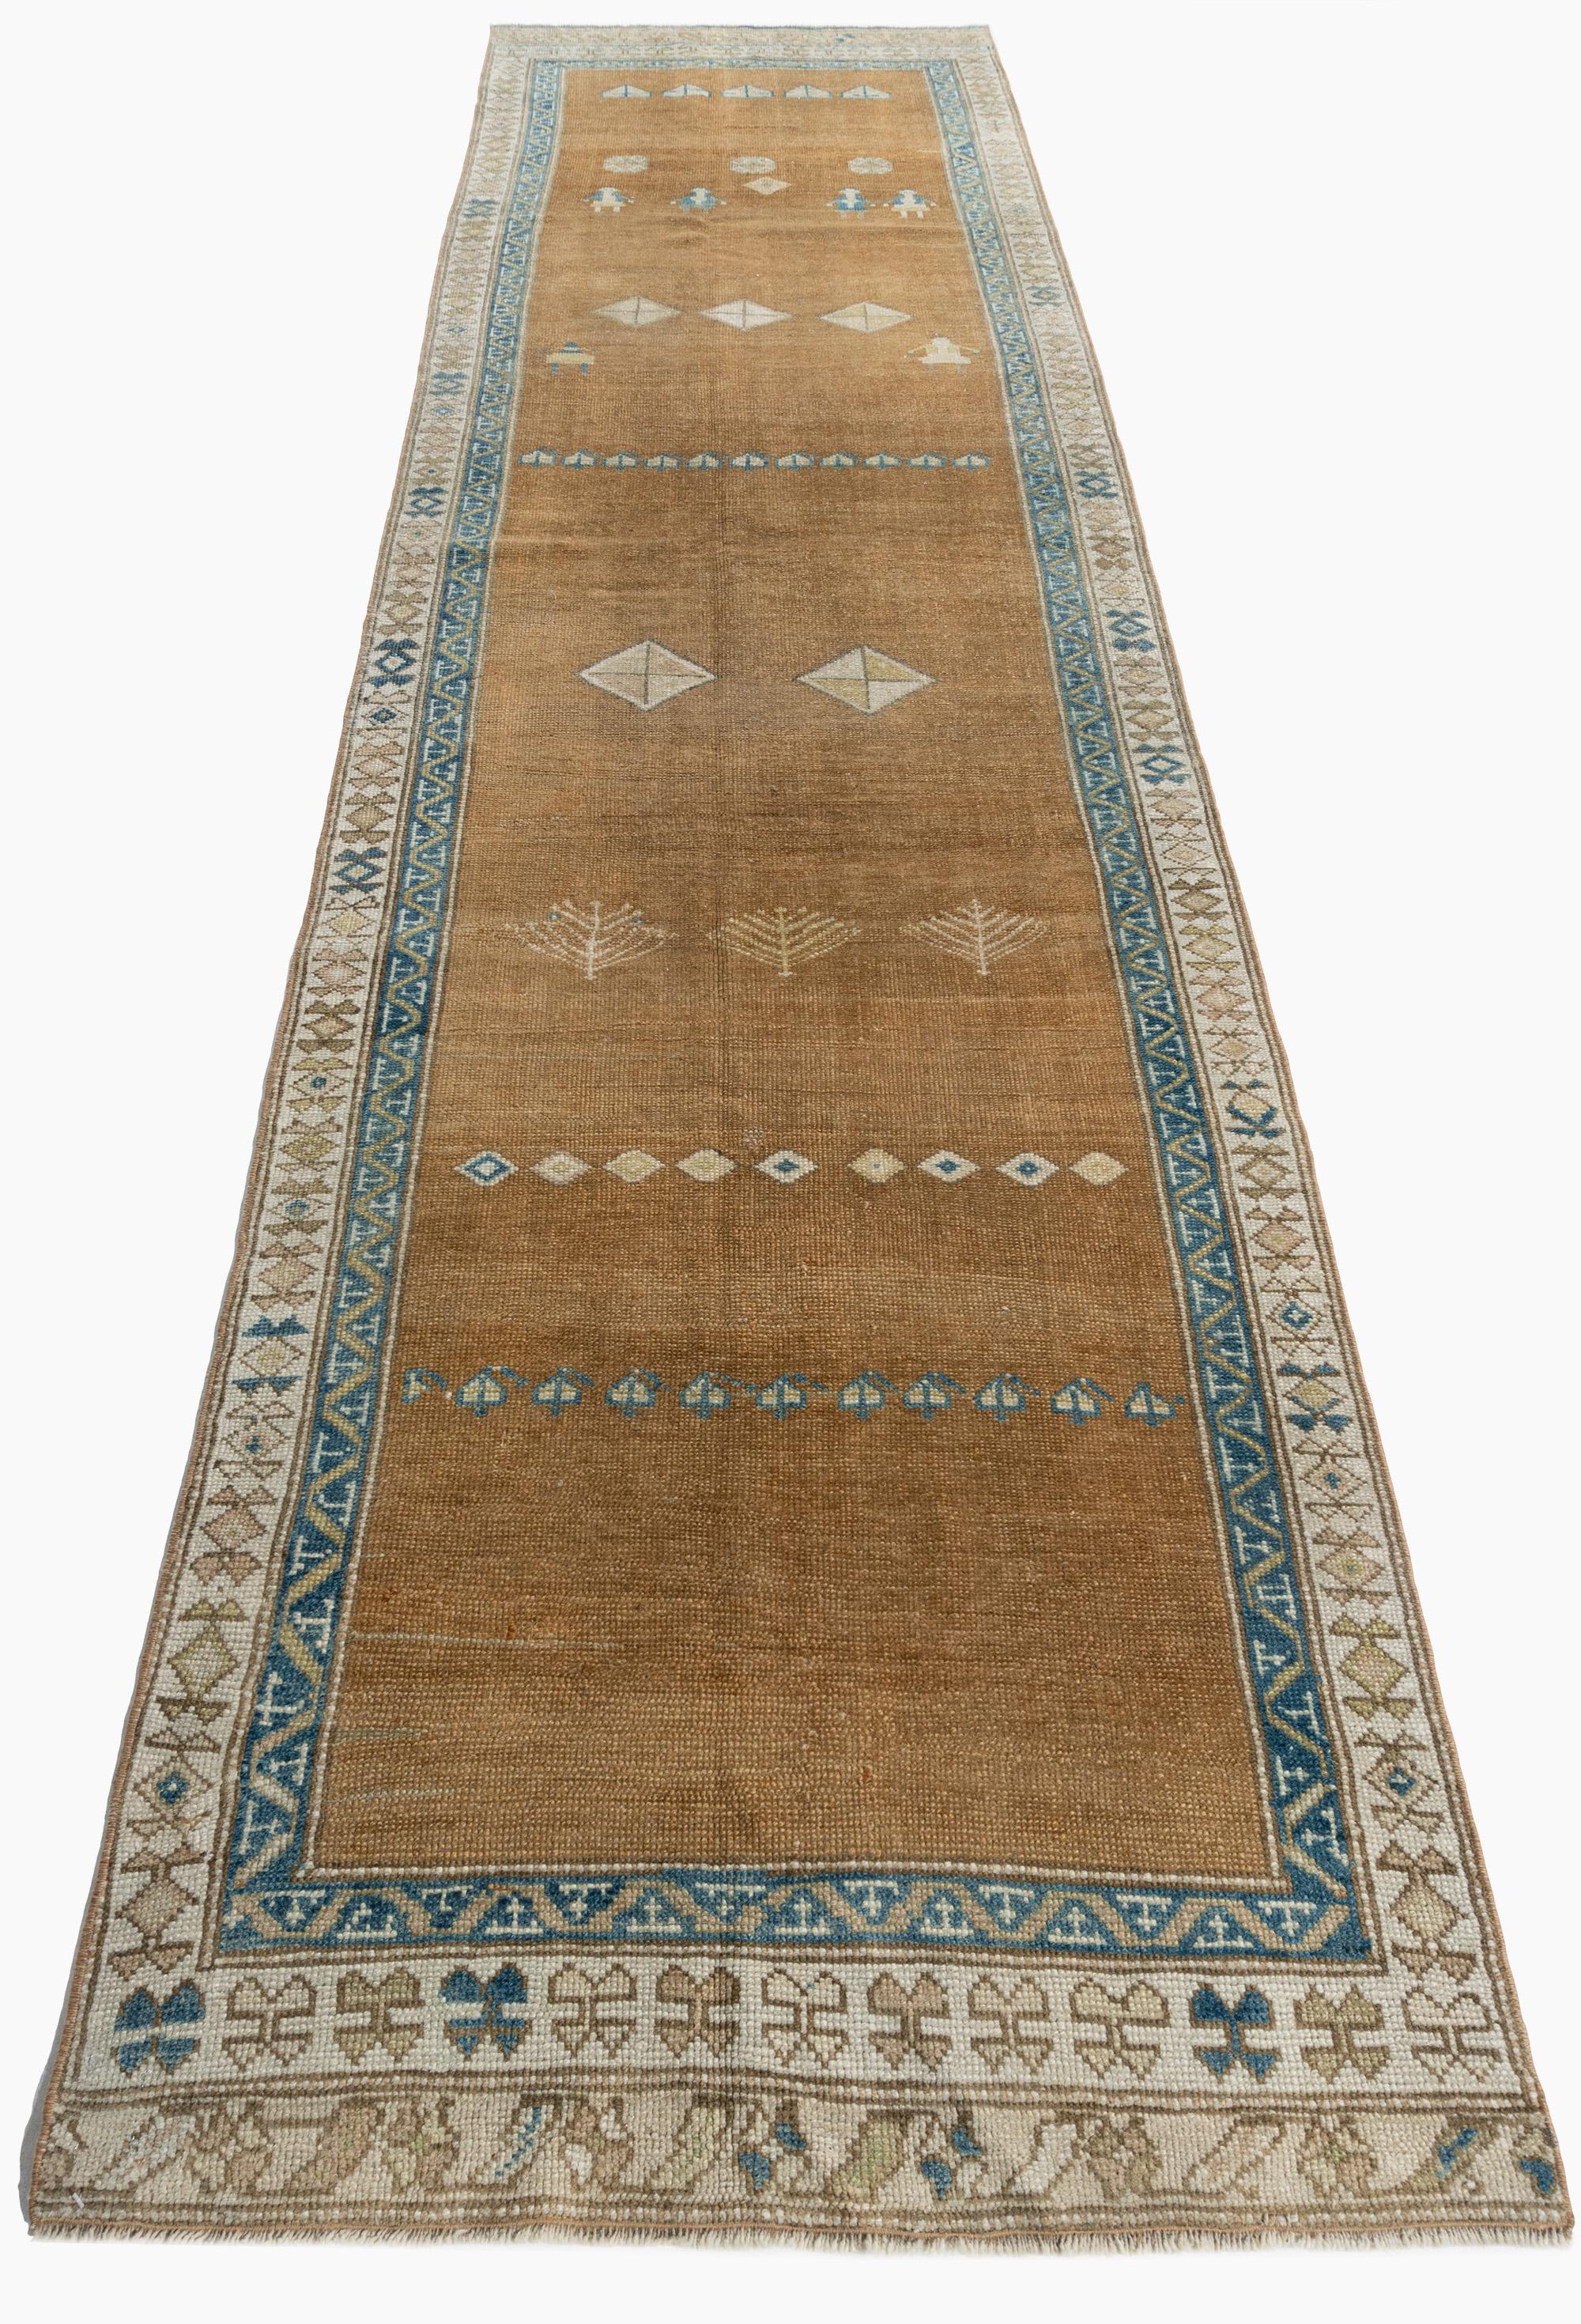 Antique Persian Hamadan Pictorial Runner 3' X 11' In Good Condition For Sale In New York, NY